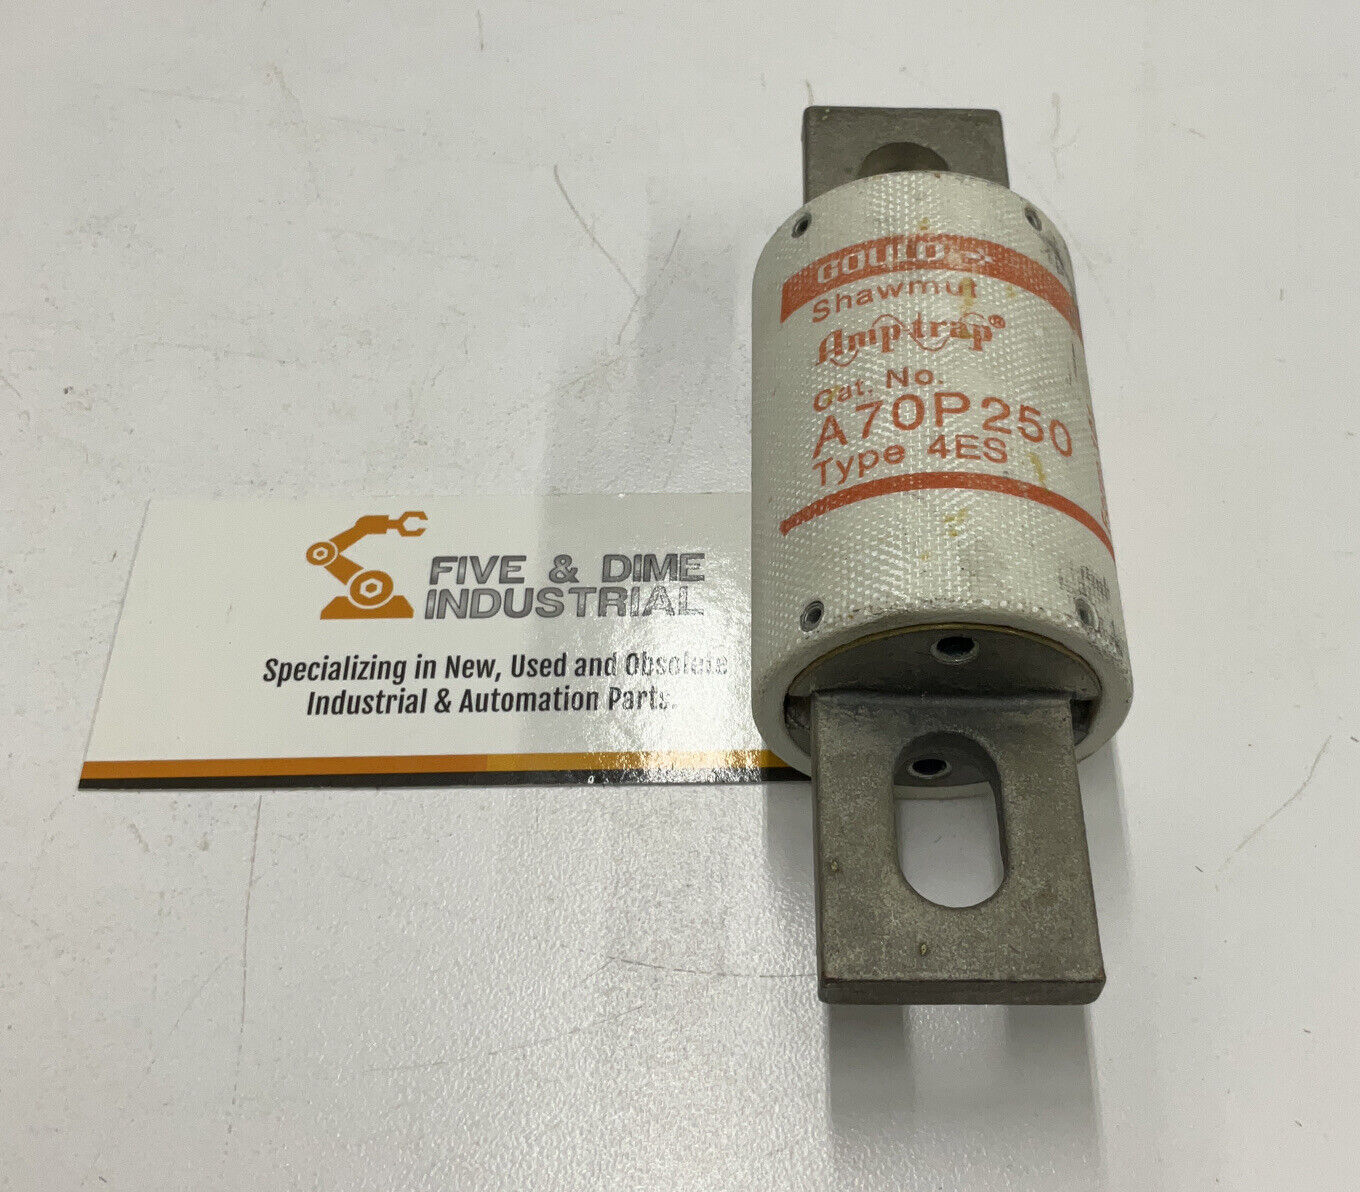 Gould Shawmut A70P250 New Type 4 Fuse 250A (YE200) - 0